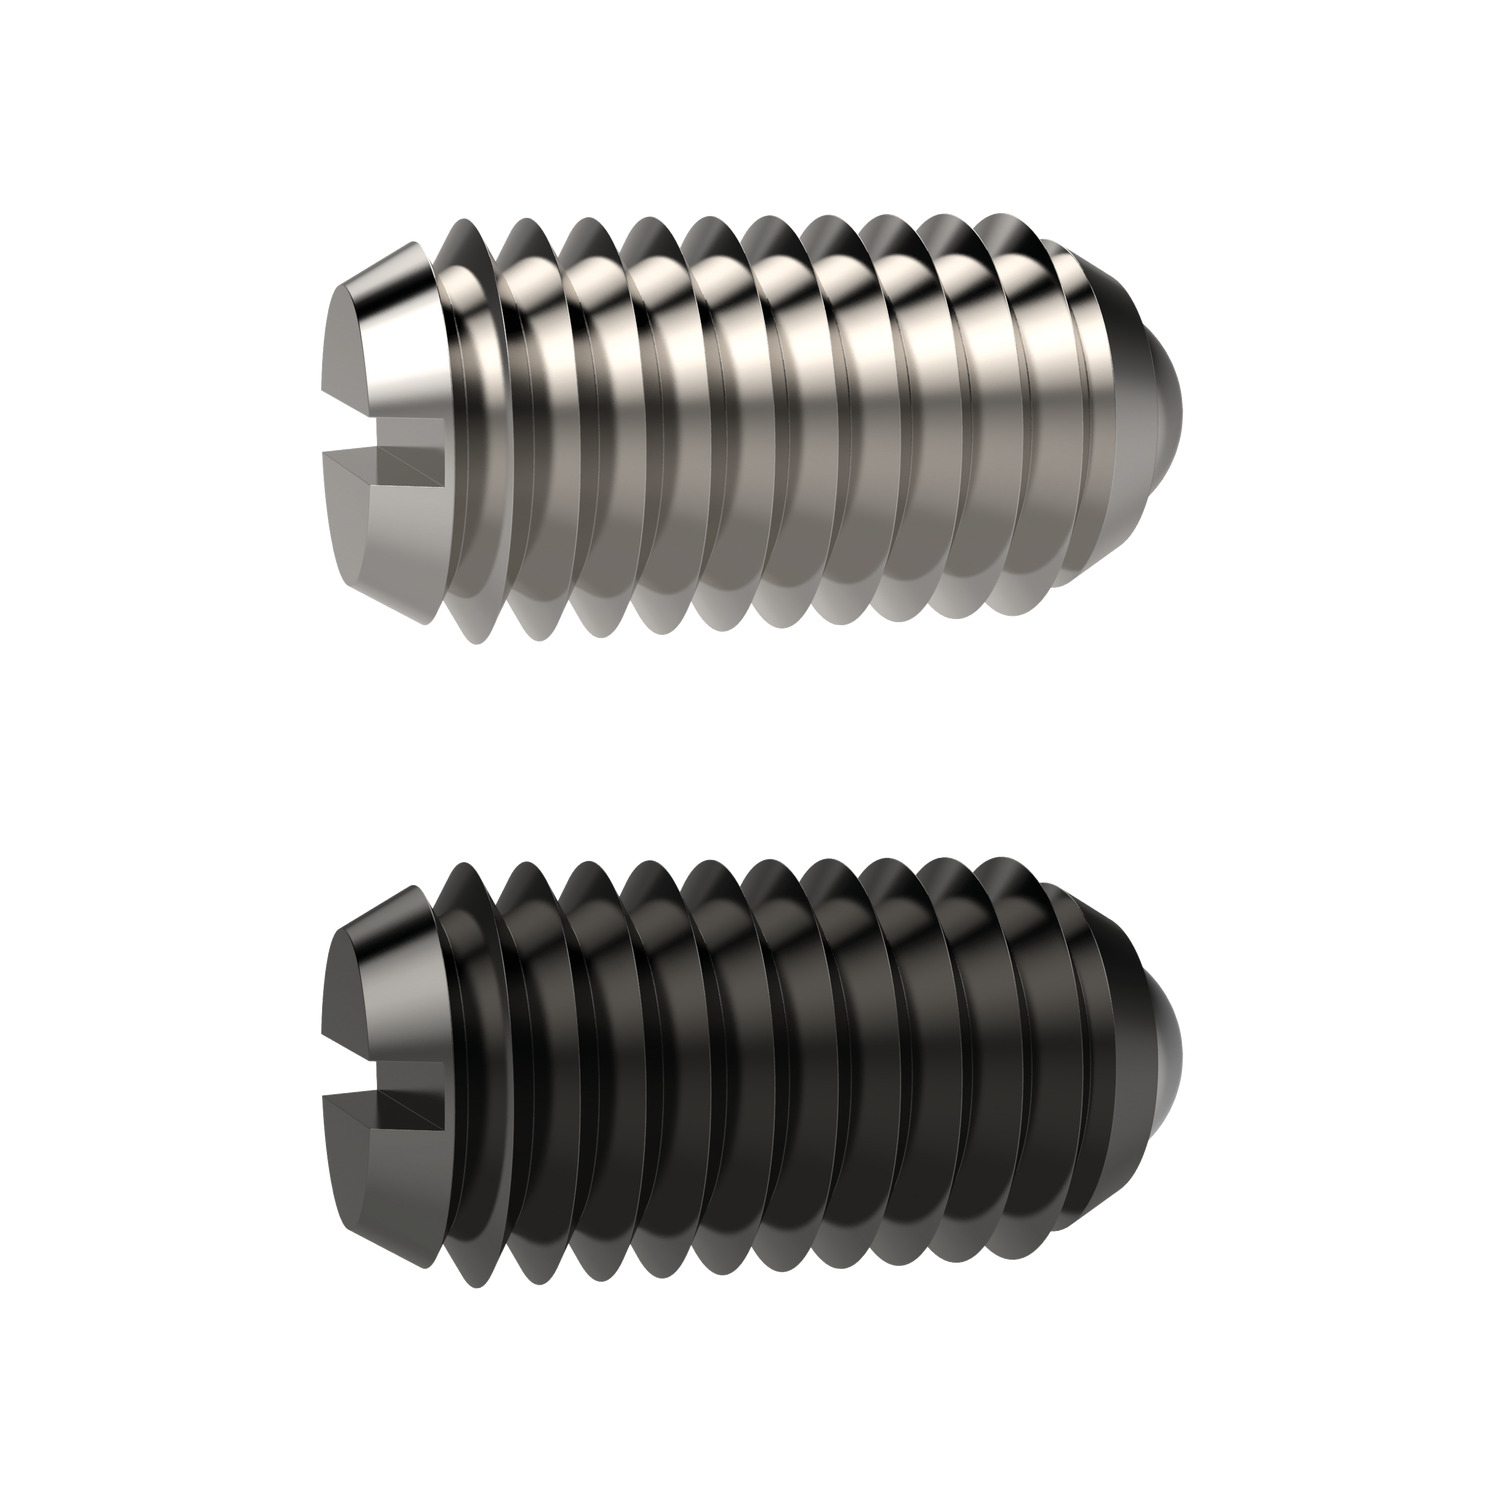 Spring Plungers A ball end and slot spring plunger available in steel and stainless steel with sizes starting from M2 upto M24. For locating, locking and position indexing. Increased spring strength variations provided within the standard range.